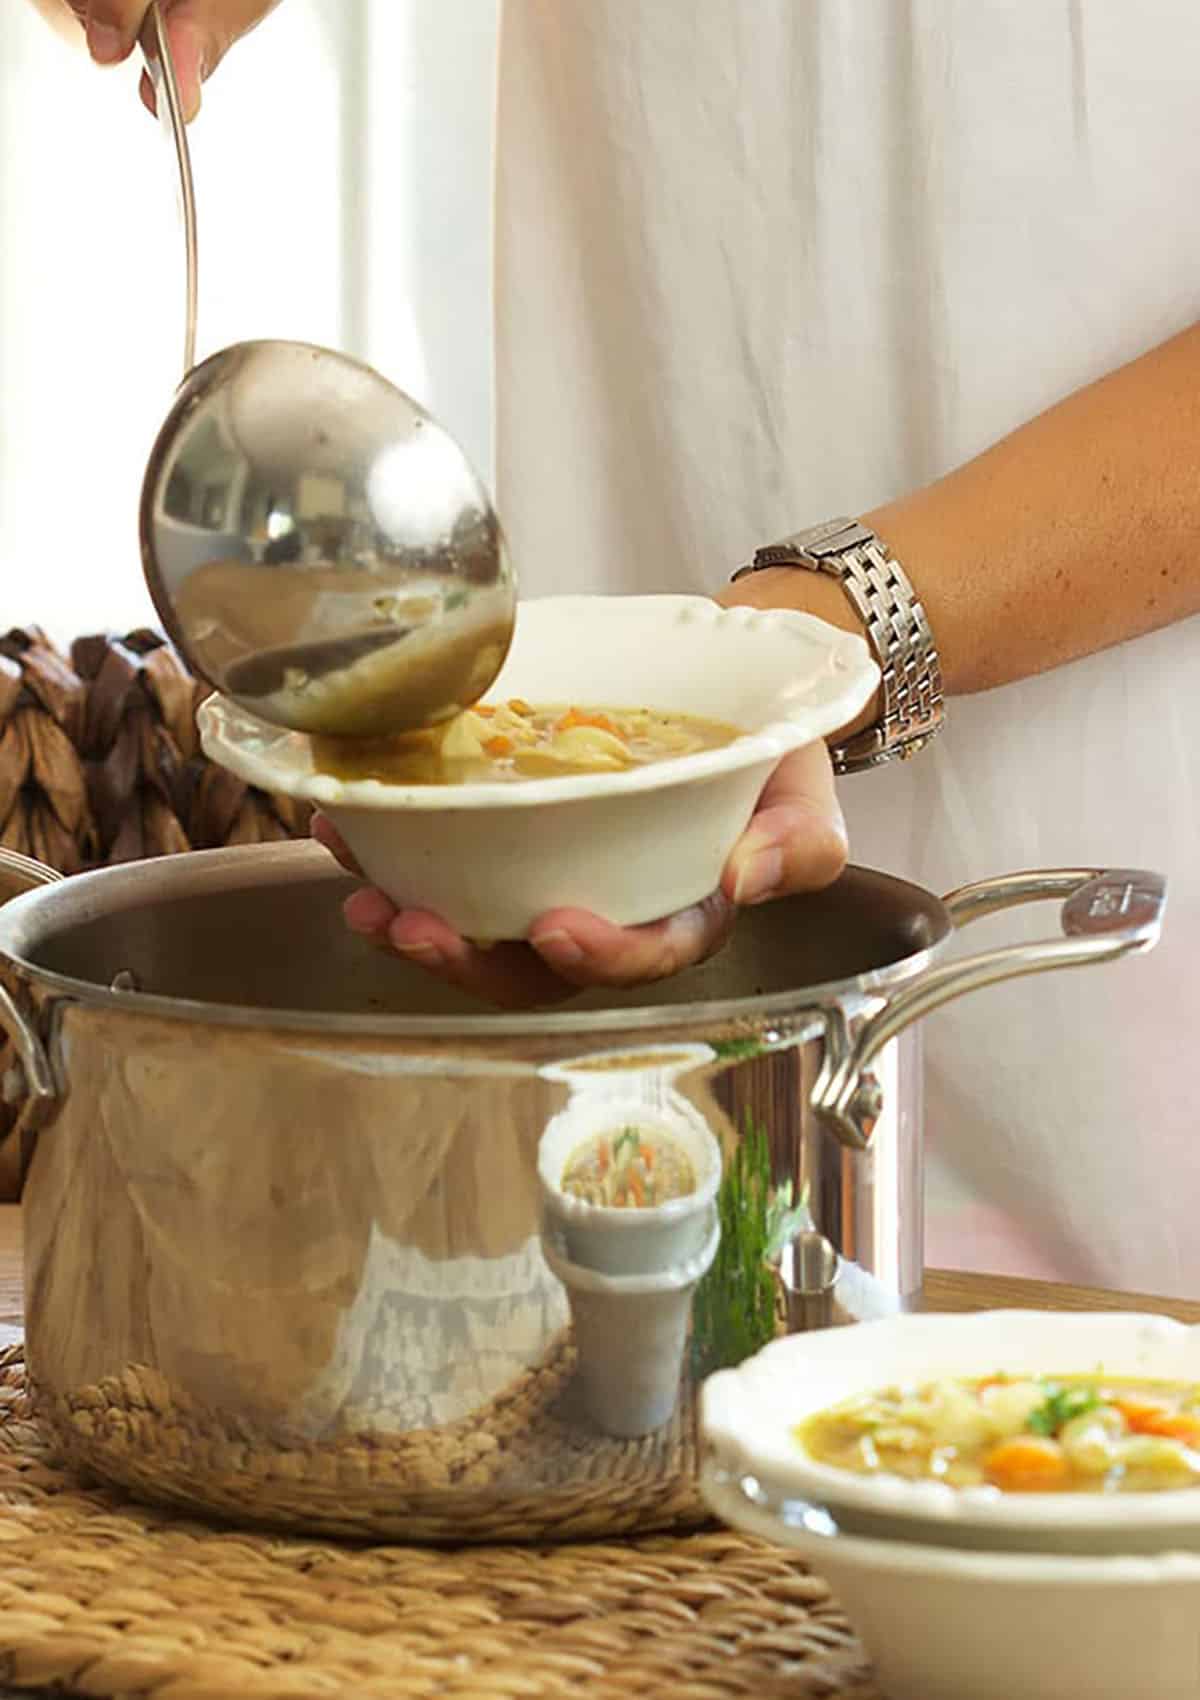 Chicken Noodle Soup being served from a stock pot with a ladle into a white bowl.